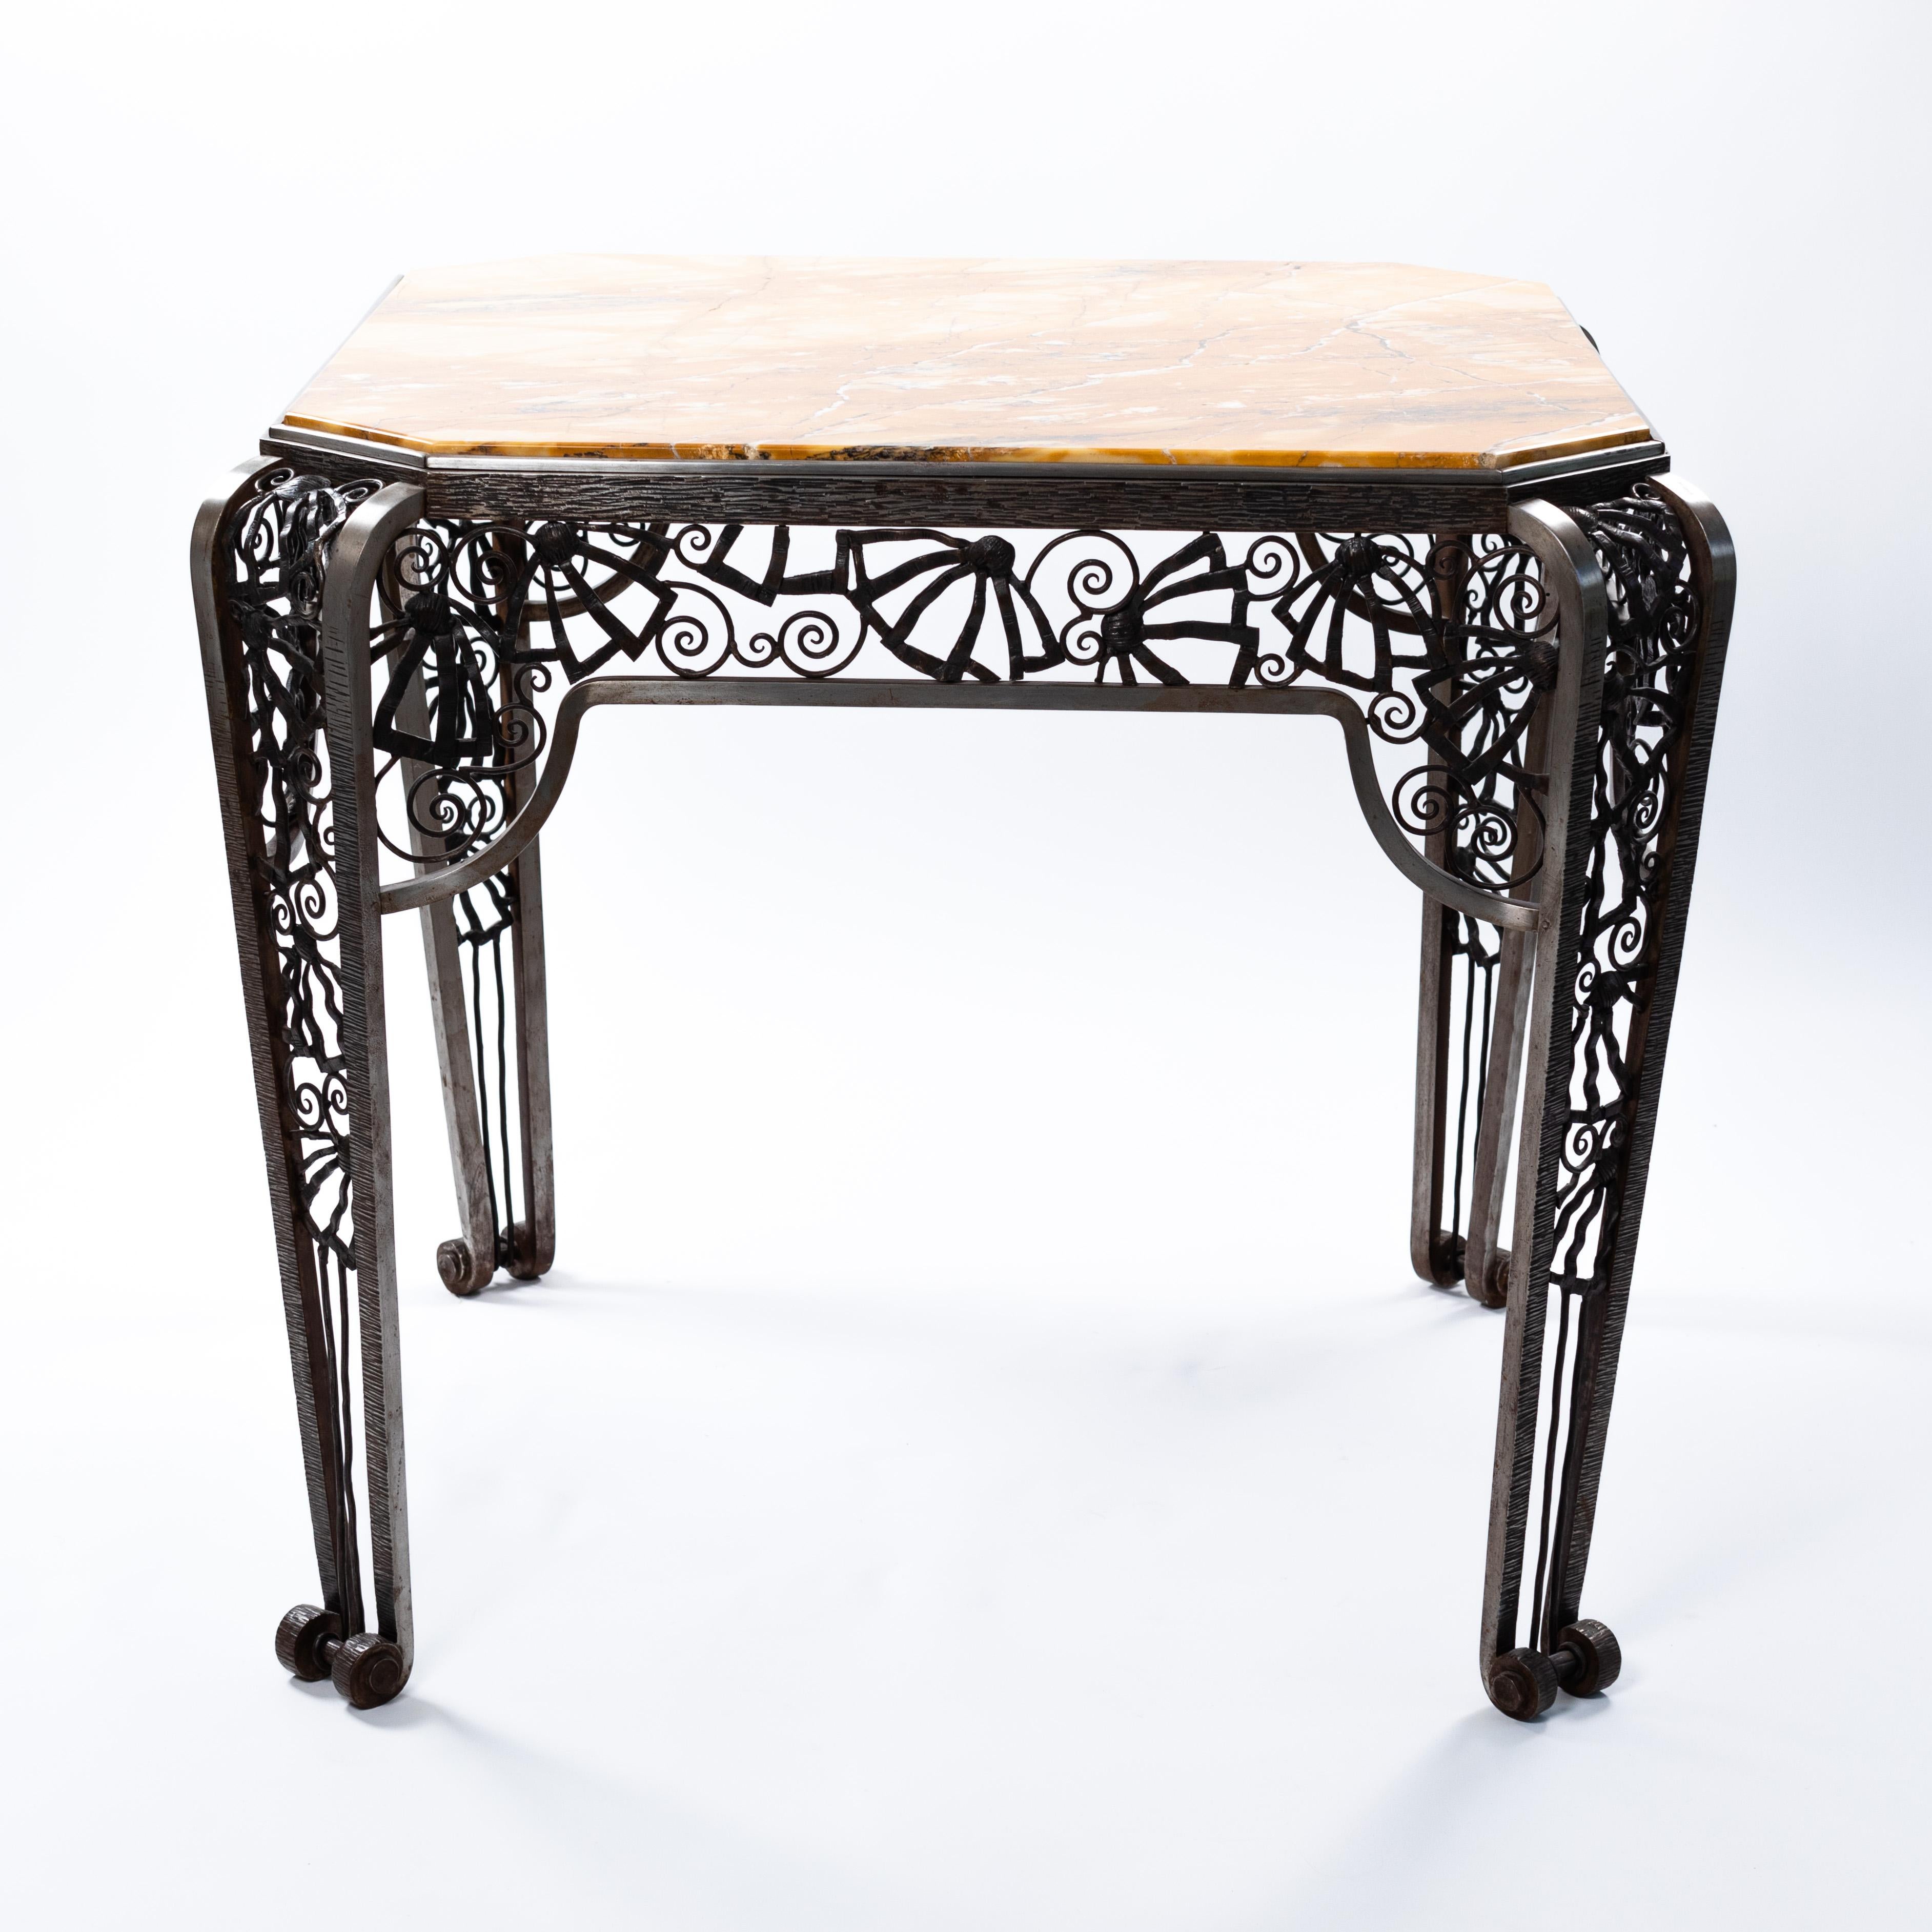 Hand-Crafted French Forged Iron Art Déco Center Table by Malatre Et Tonnelier, 1930s For Sale